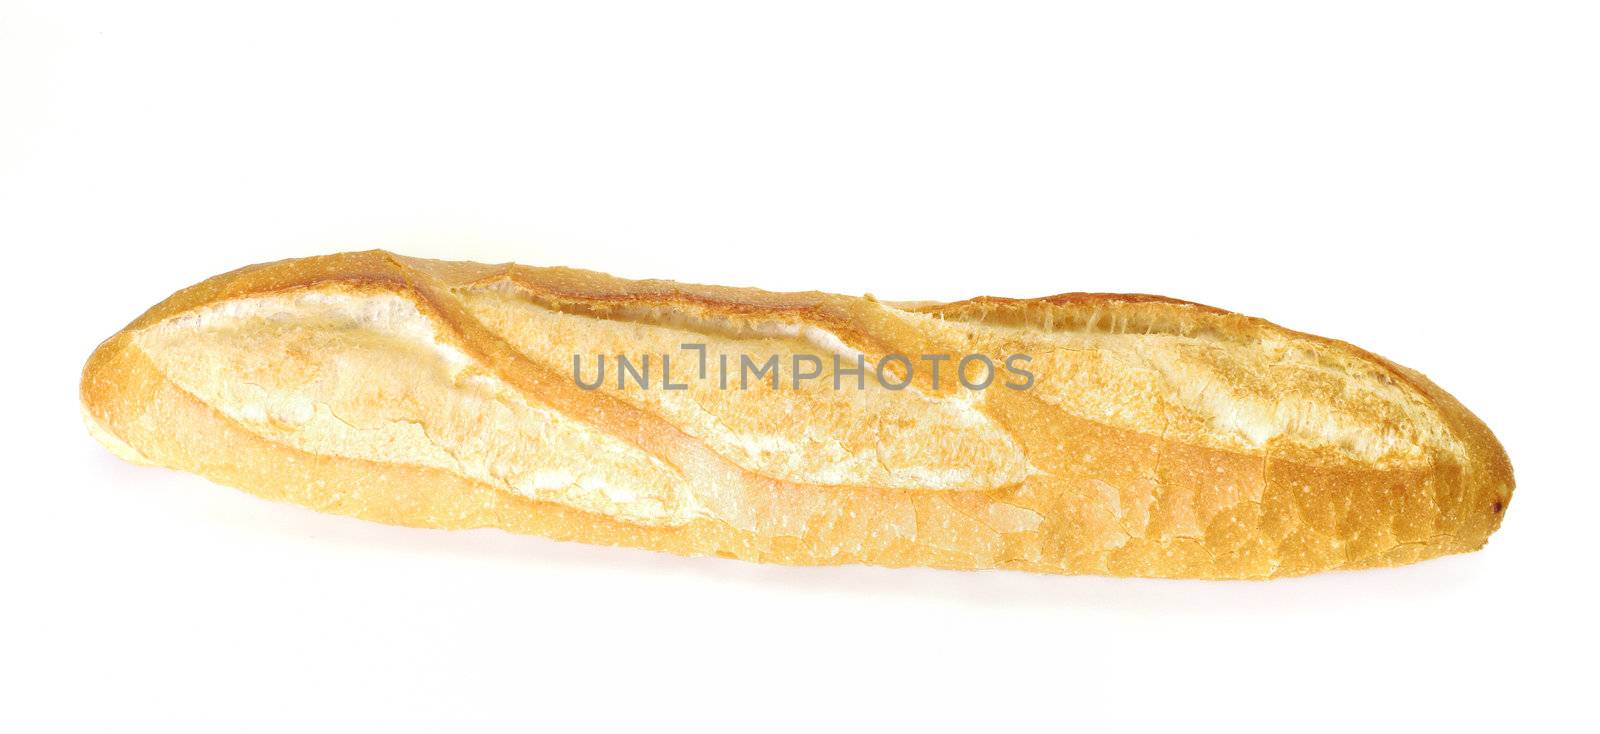 long loaf, Baguette on white background  by pixbox77